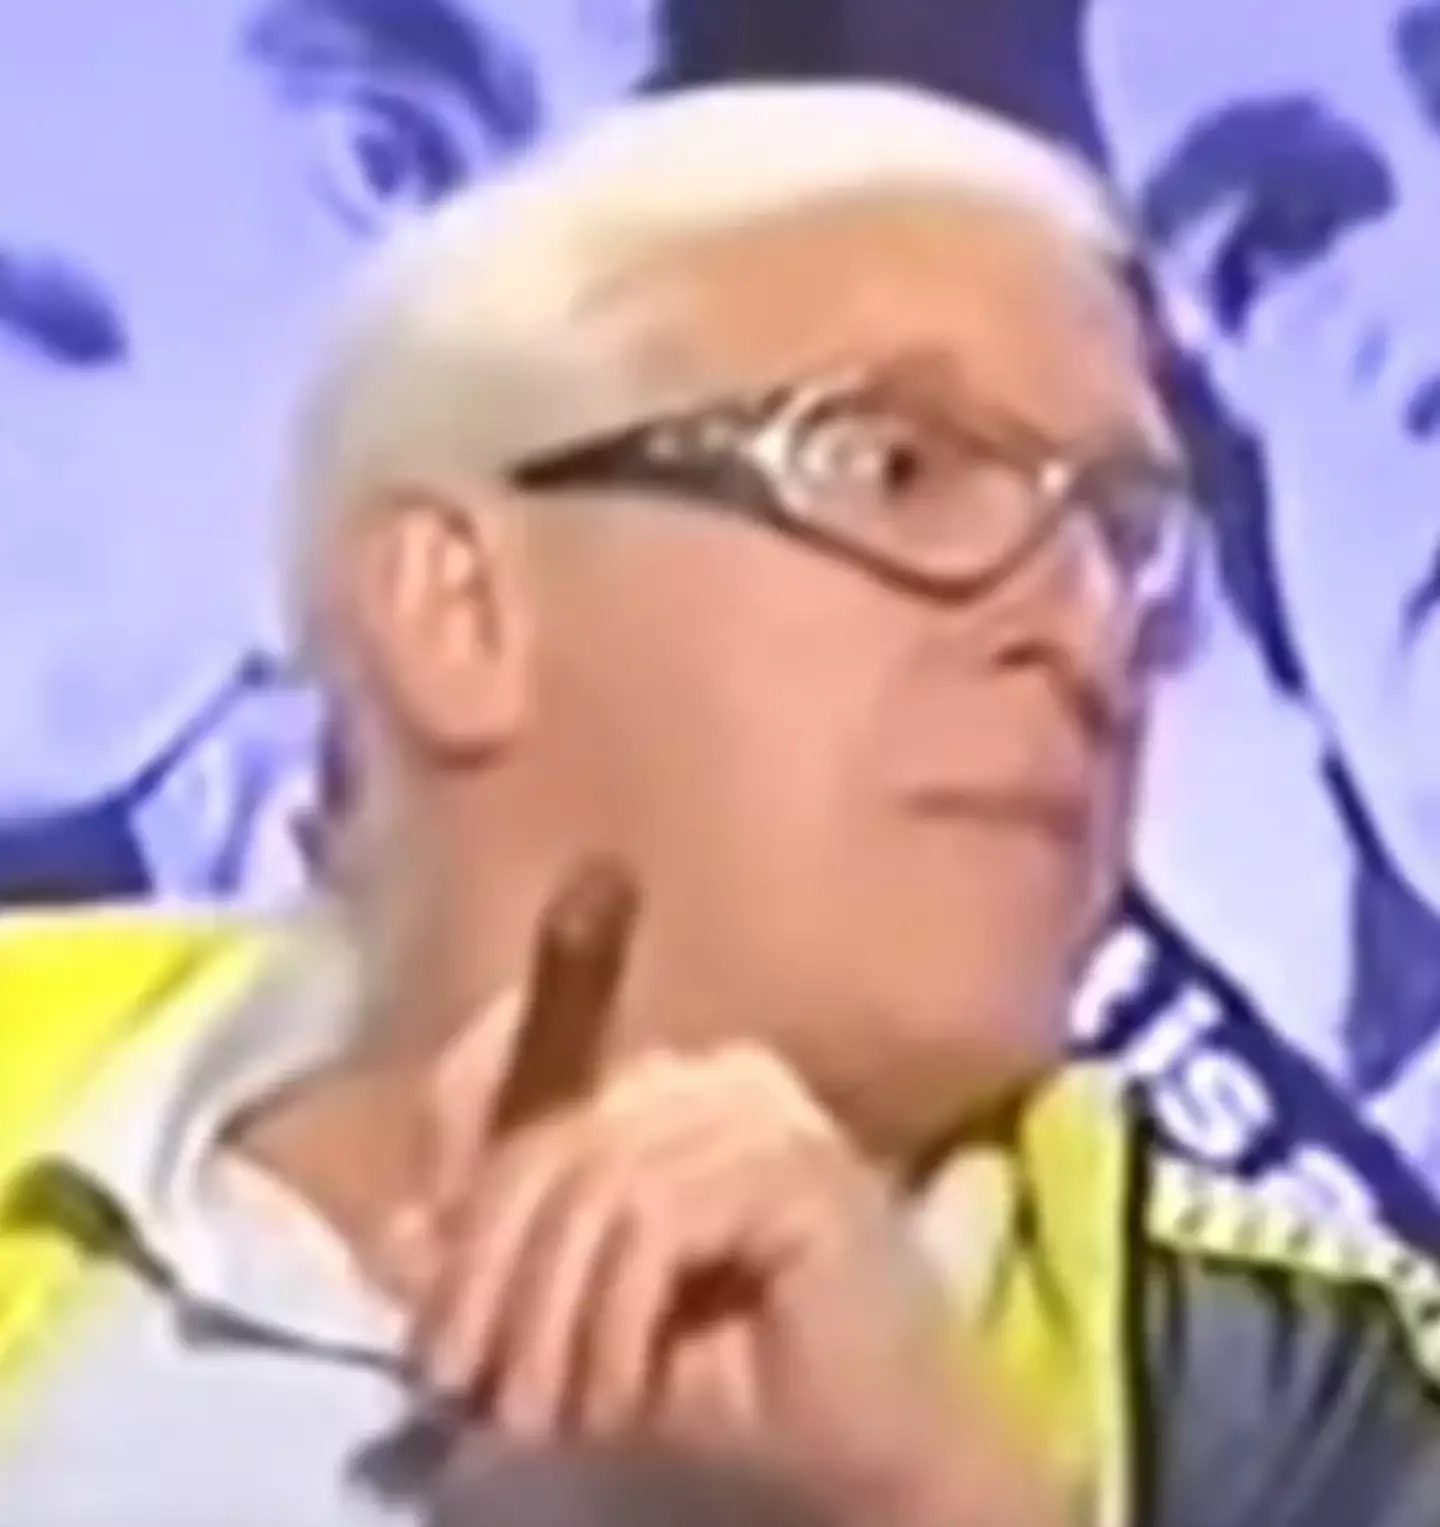 Jimmy Savile in a 1999 Have I Got News For You appearance.